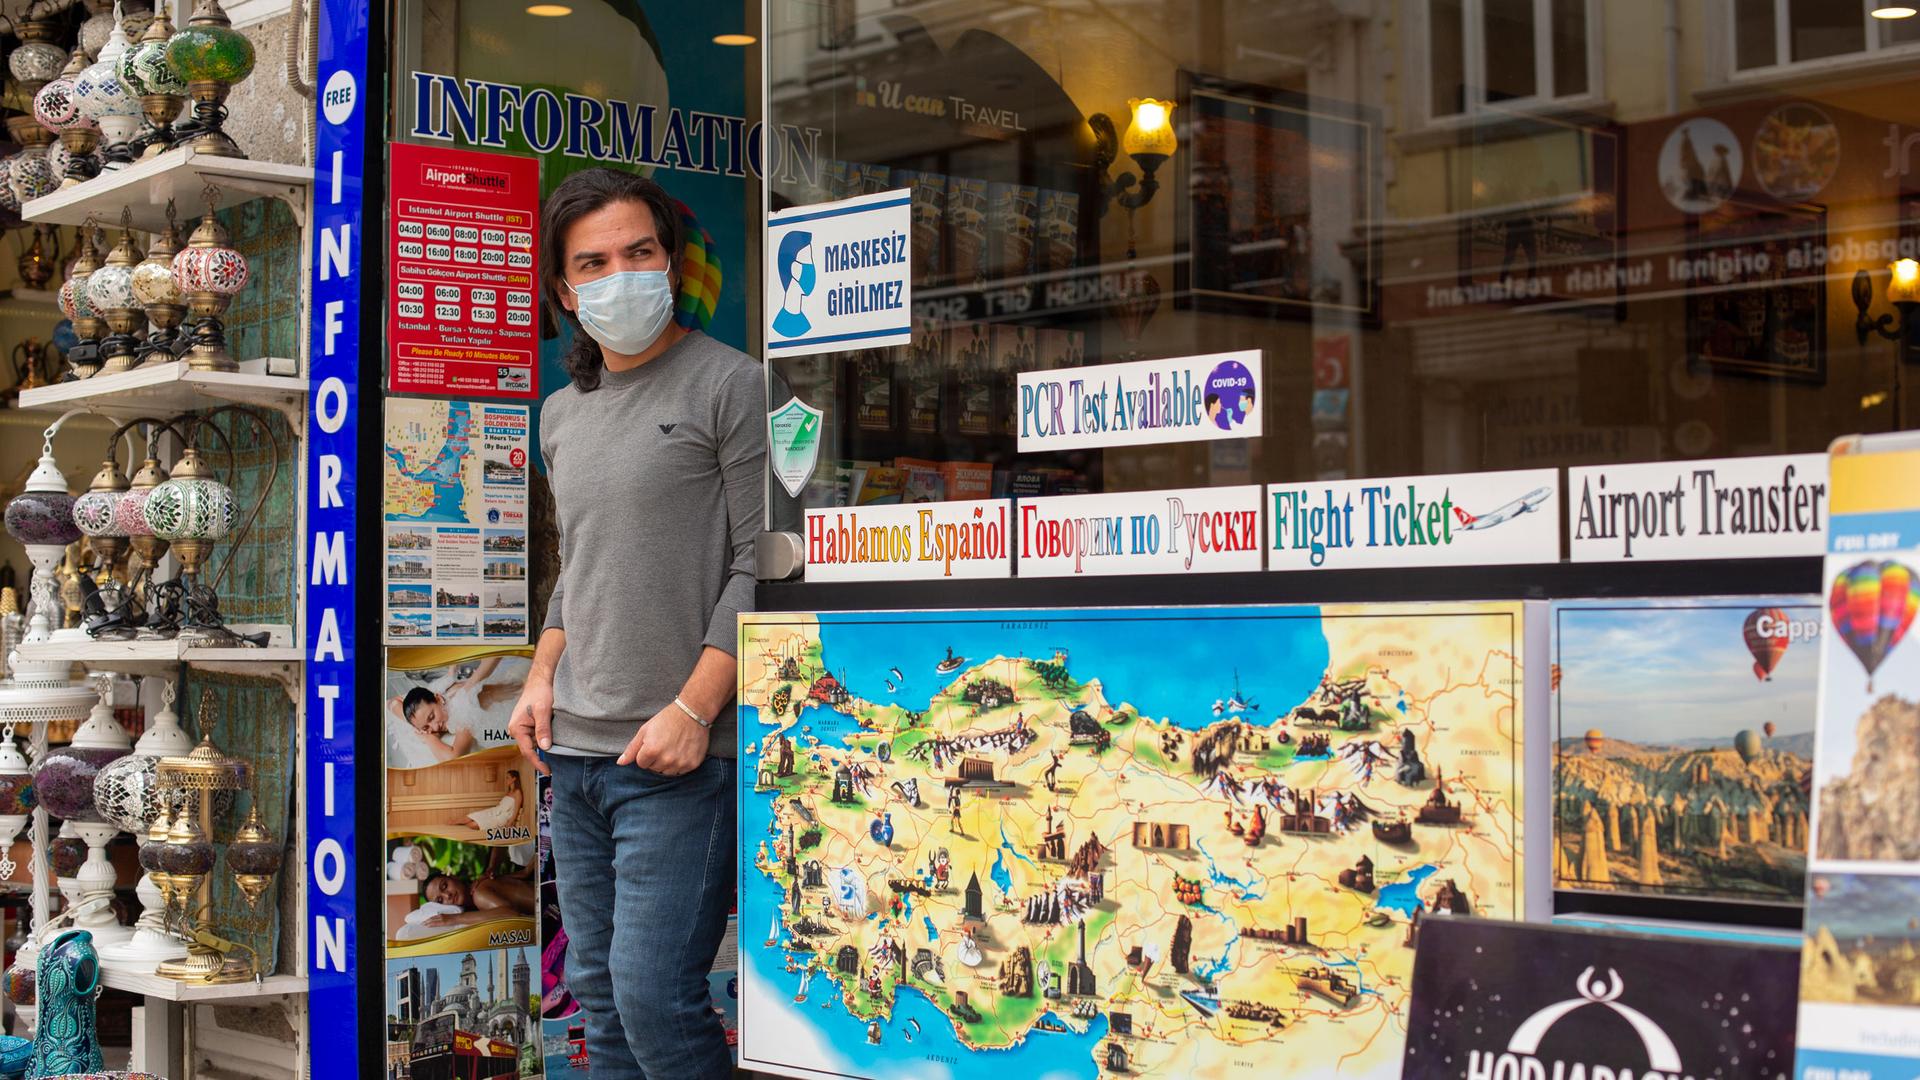 A man is shown wearing a face mask and standing in the doorway of a sightseeing store with maps of Istanbul on the windows.